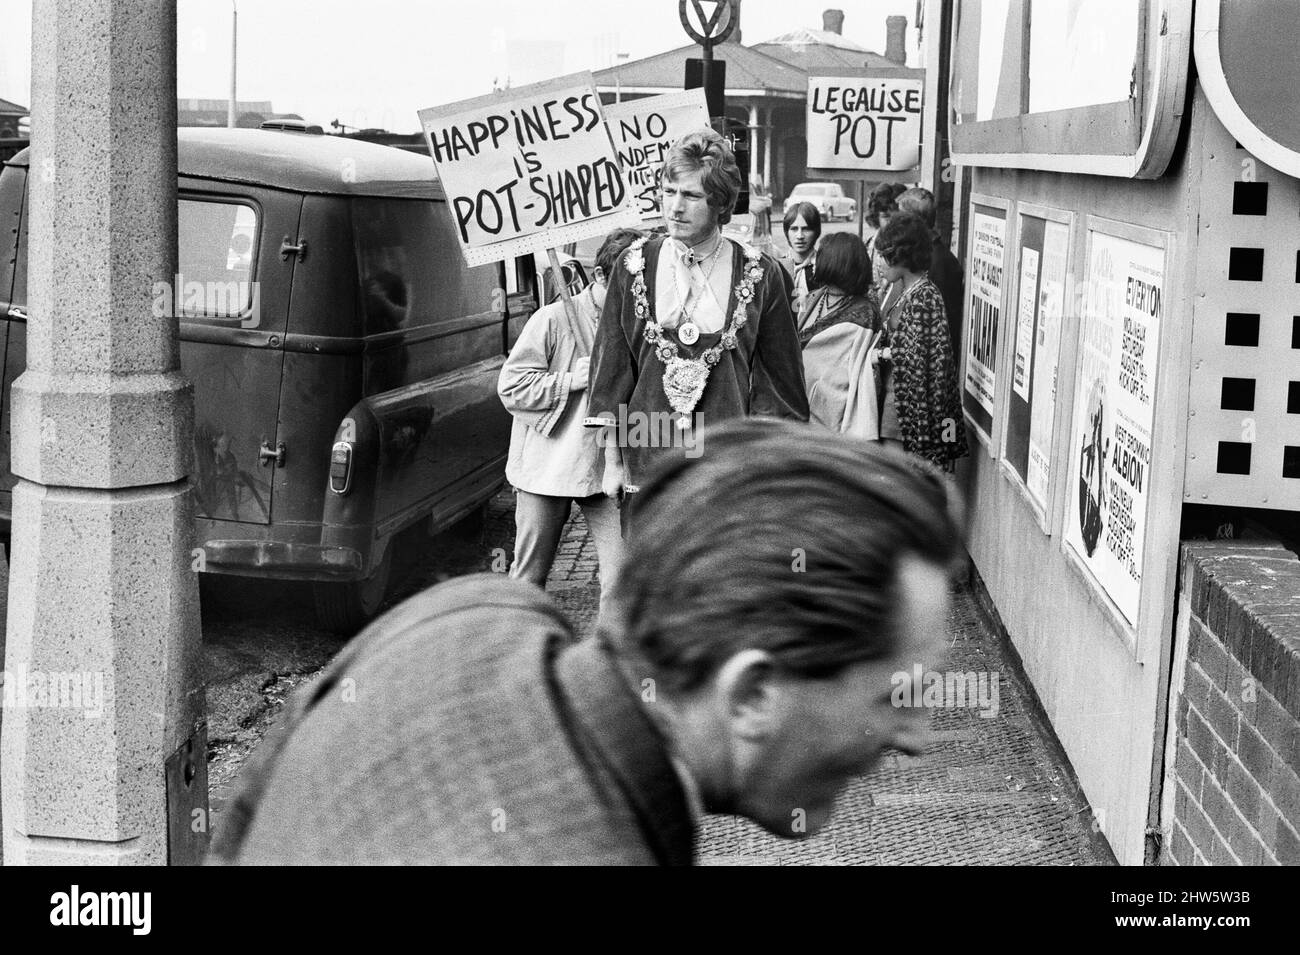 Musician and singer Robert Plant with some of his followers after he  appeared in court on drugs charges, Fans holding Legalise Pot banners  follow him from court, Friday 11th August 1967 Stock